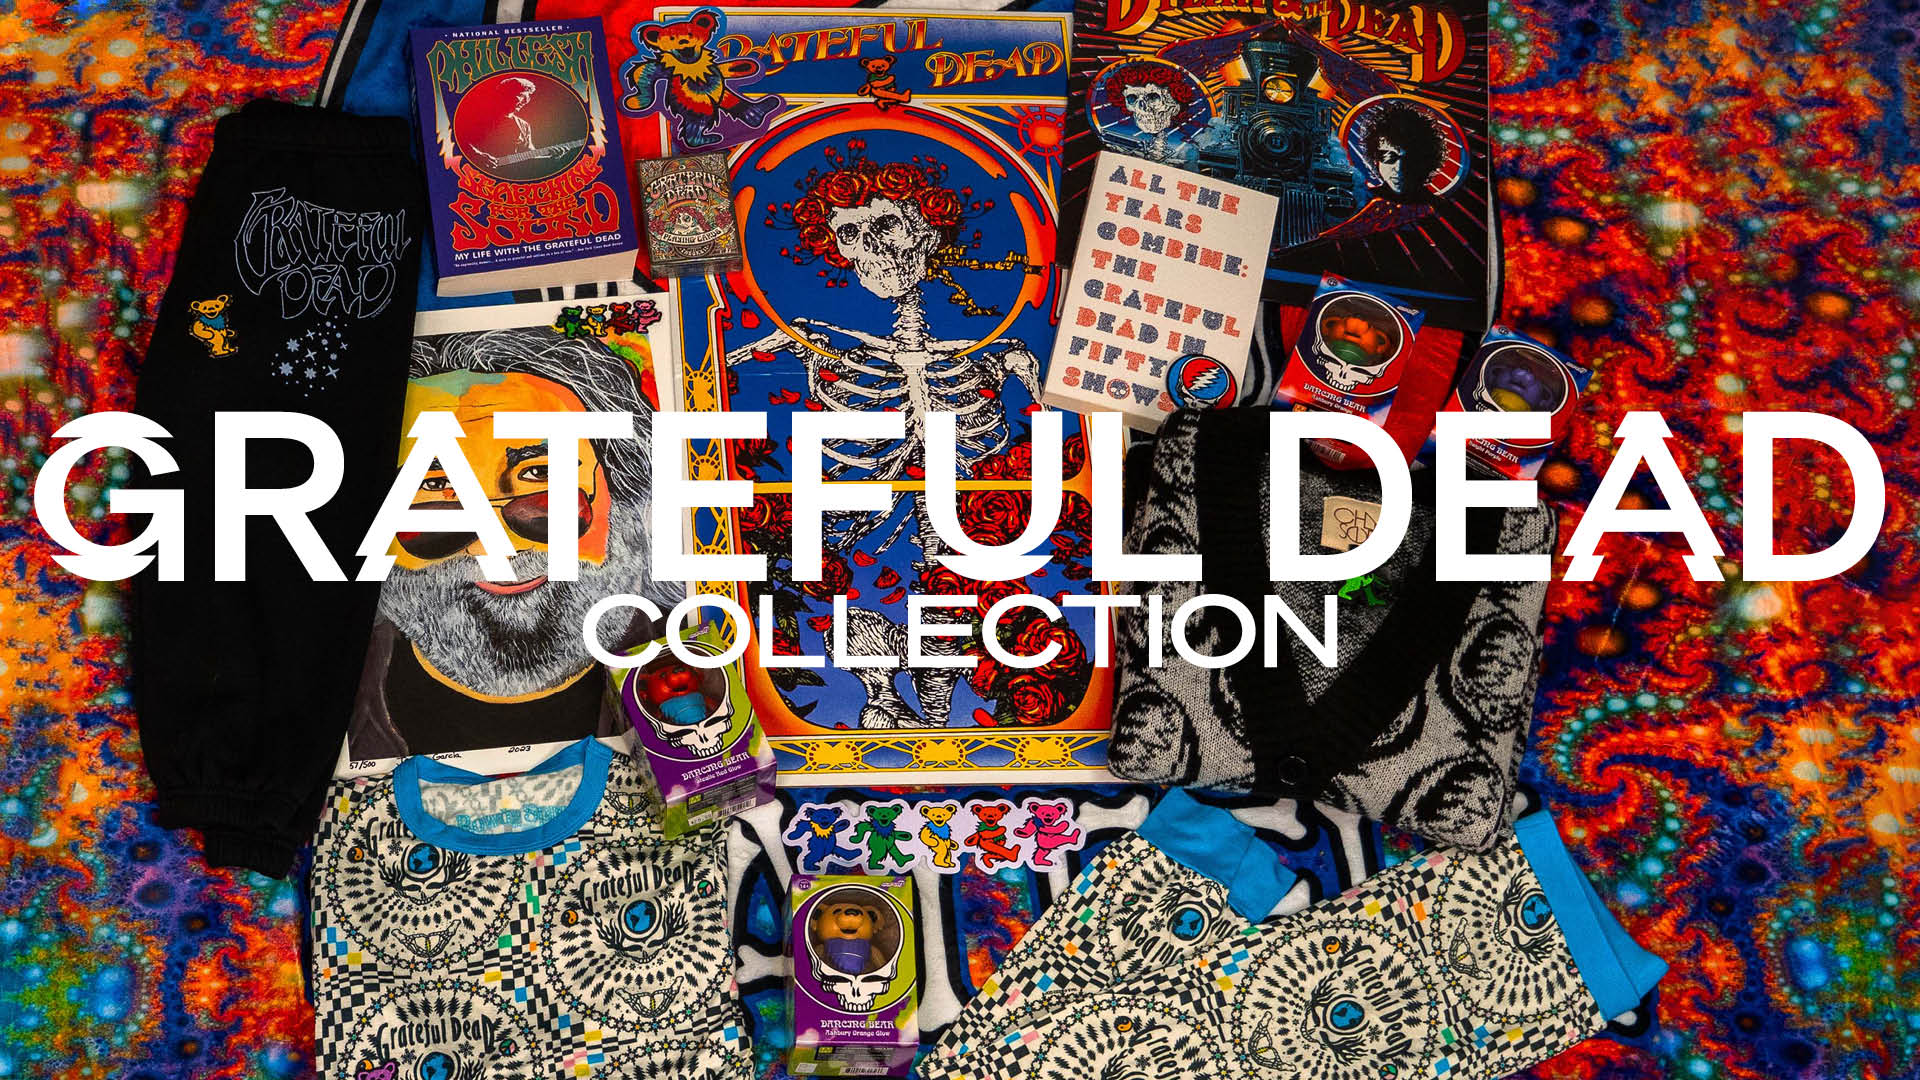 The Story of the Grateful Dead's Gear Is the Story of Rock 'n' Roll